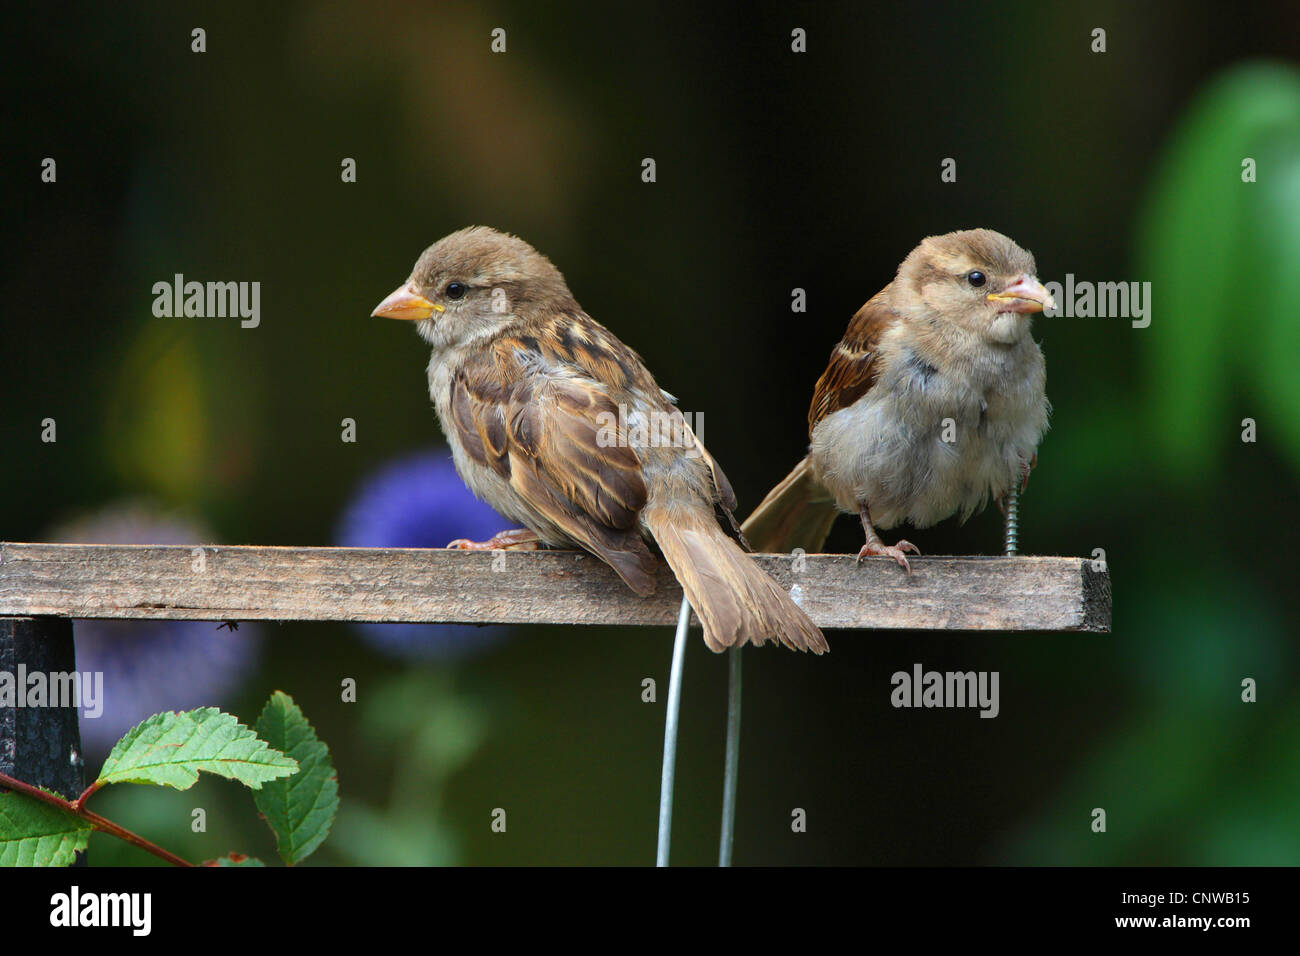 house sparrow (Passer domesticus), to individuals sitting on a wooden balustrade, Germany Stock Photo